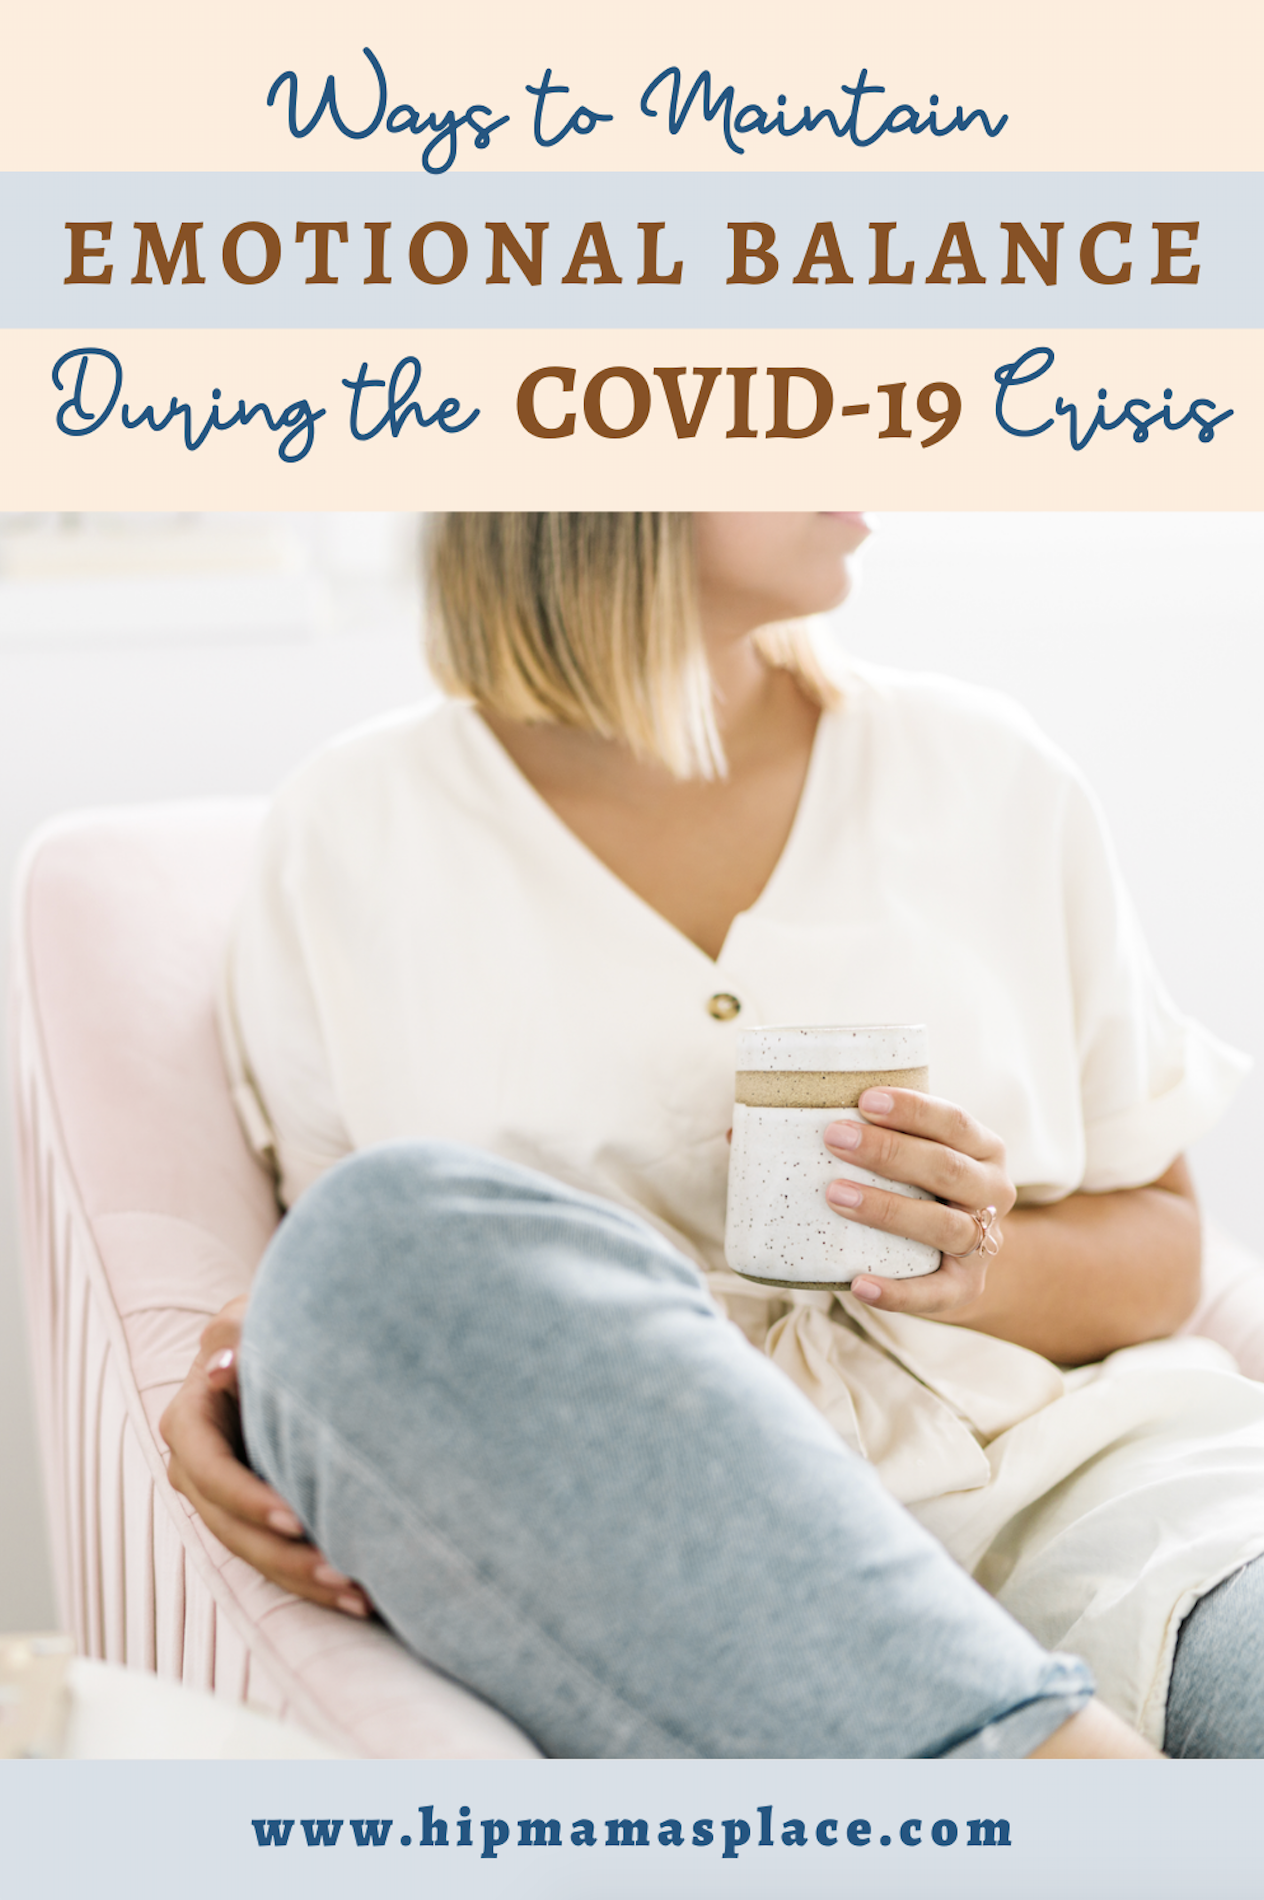 10 Ways to Maintain Your Emotional Balance and Mental Health During the COVID-19 Crisis